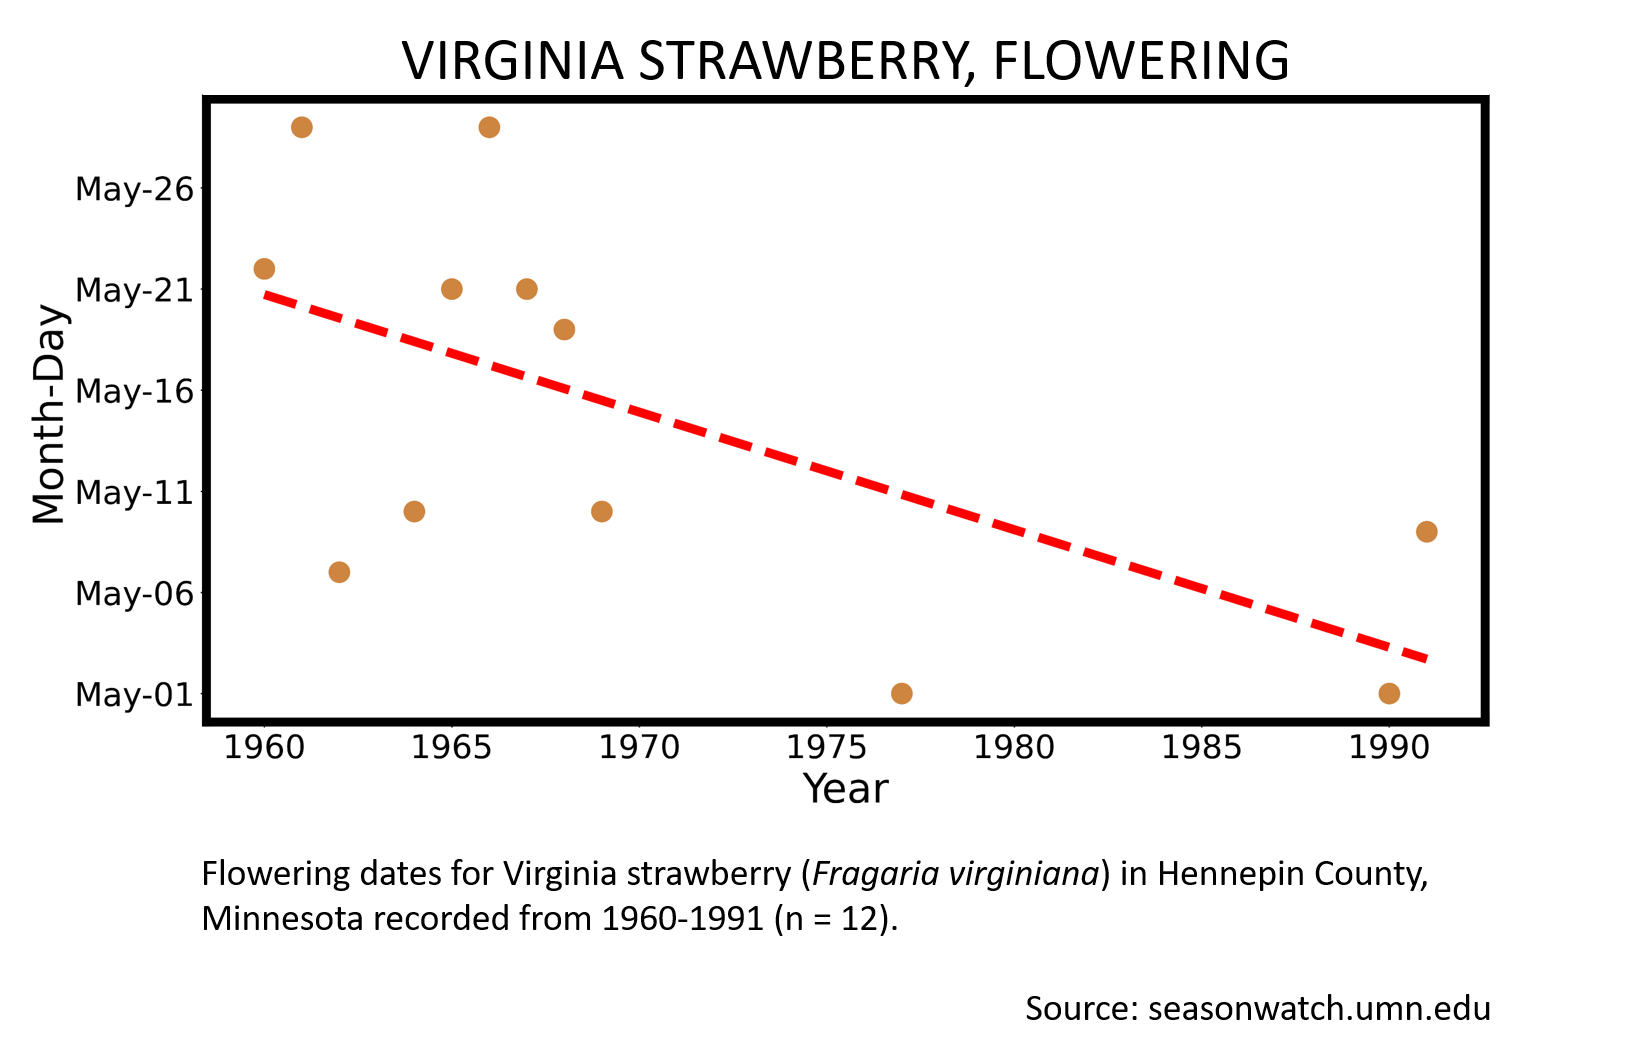 Scatterplot showing Virginia strawberry phenology observations in Hennepin County, Minnesota